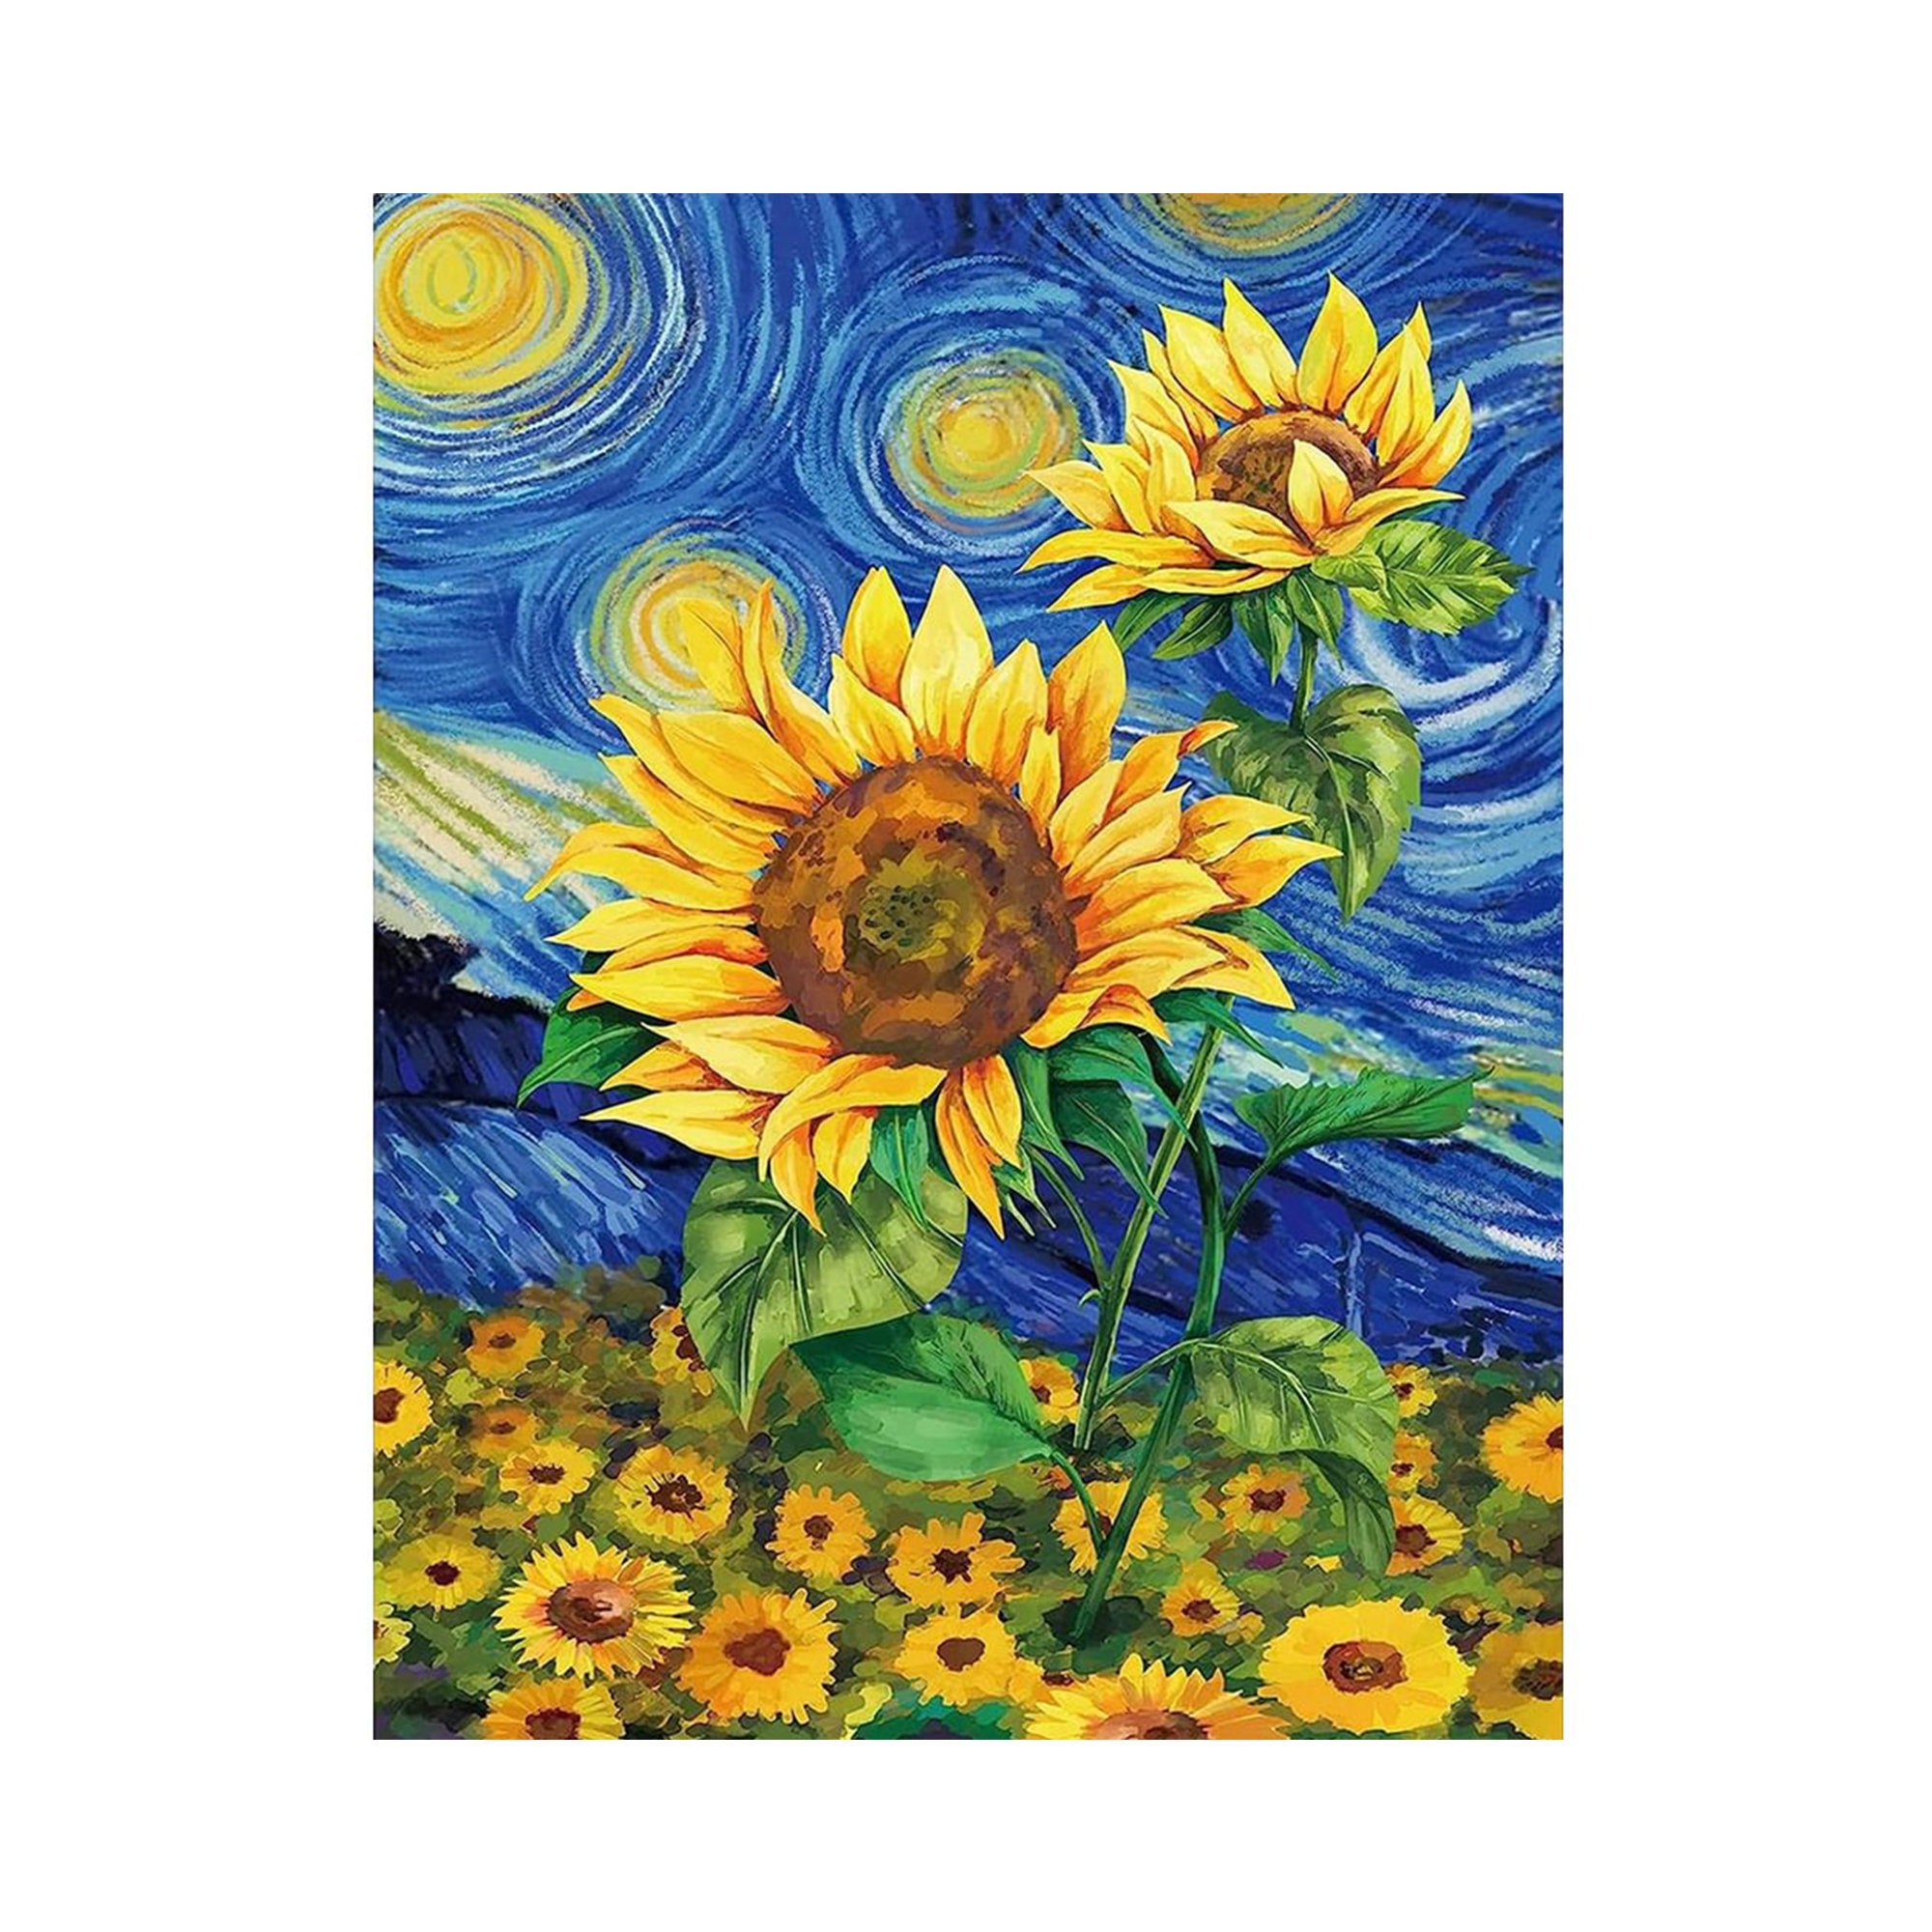  LEARTDYY 5D Diamond Painting Kit for Adults, Sunflower and  Inspirational Quotes, DIY Full Round Diamonds, Home Relax Decoration and  Wall Crafts, Home Decor, to My Daughter from Mom Gift 12x16in